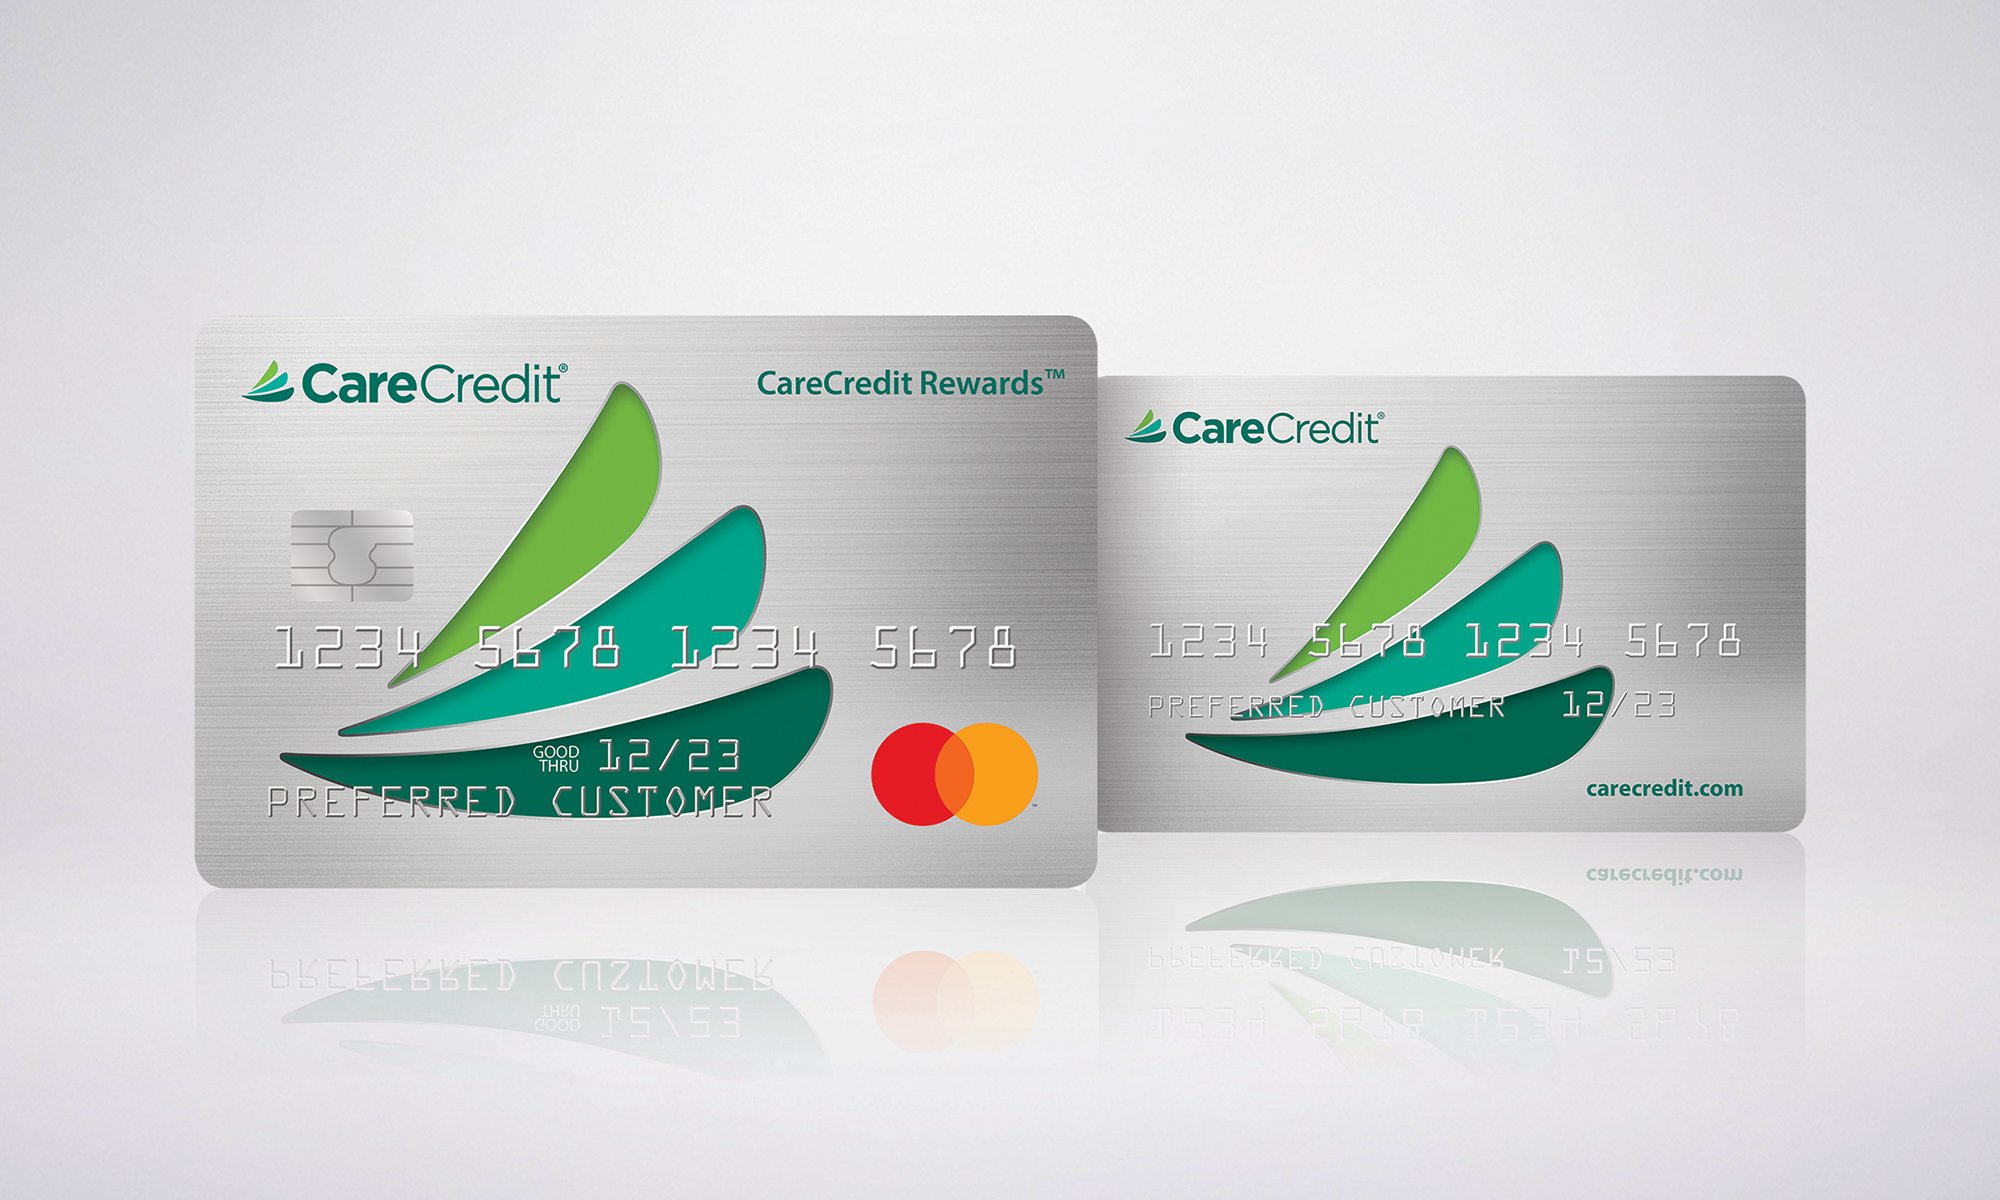 What credit score is needed for CareCredit?